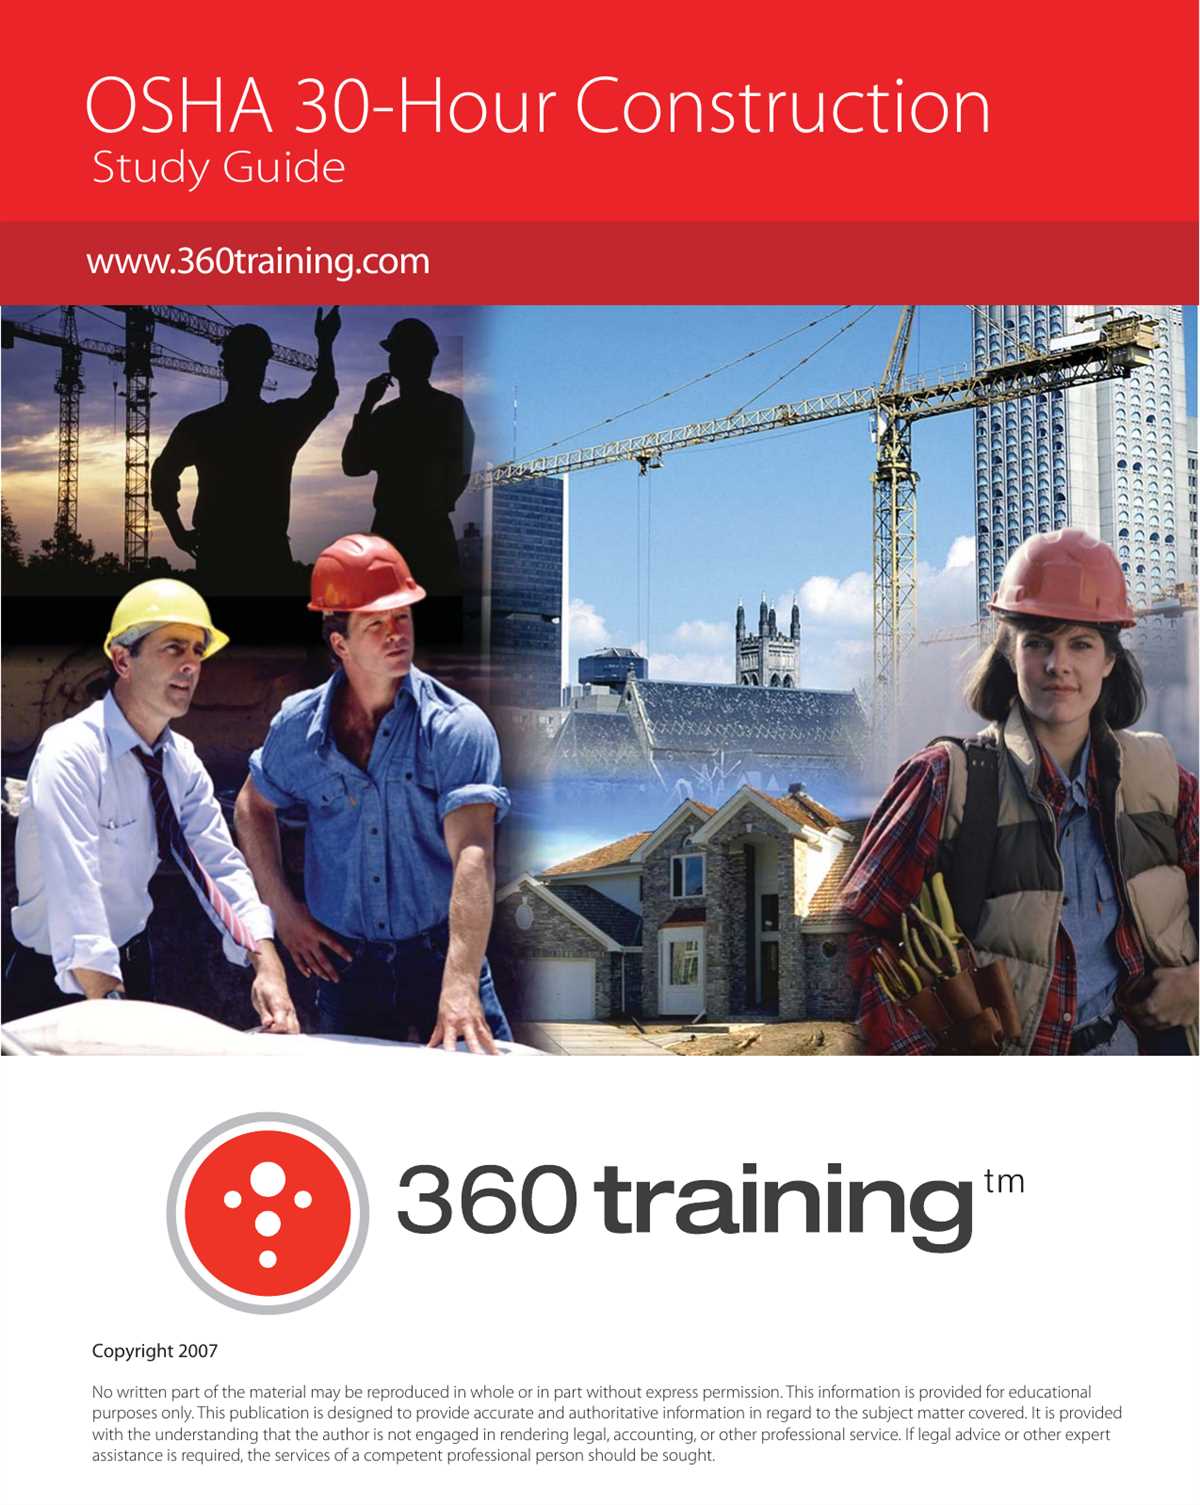 How is the OSHA 30 Hour Training delivered?